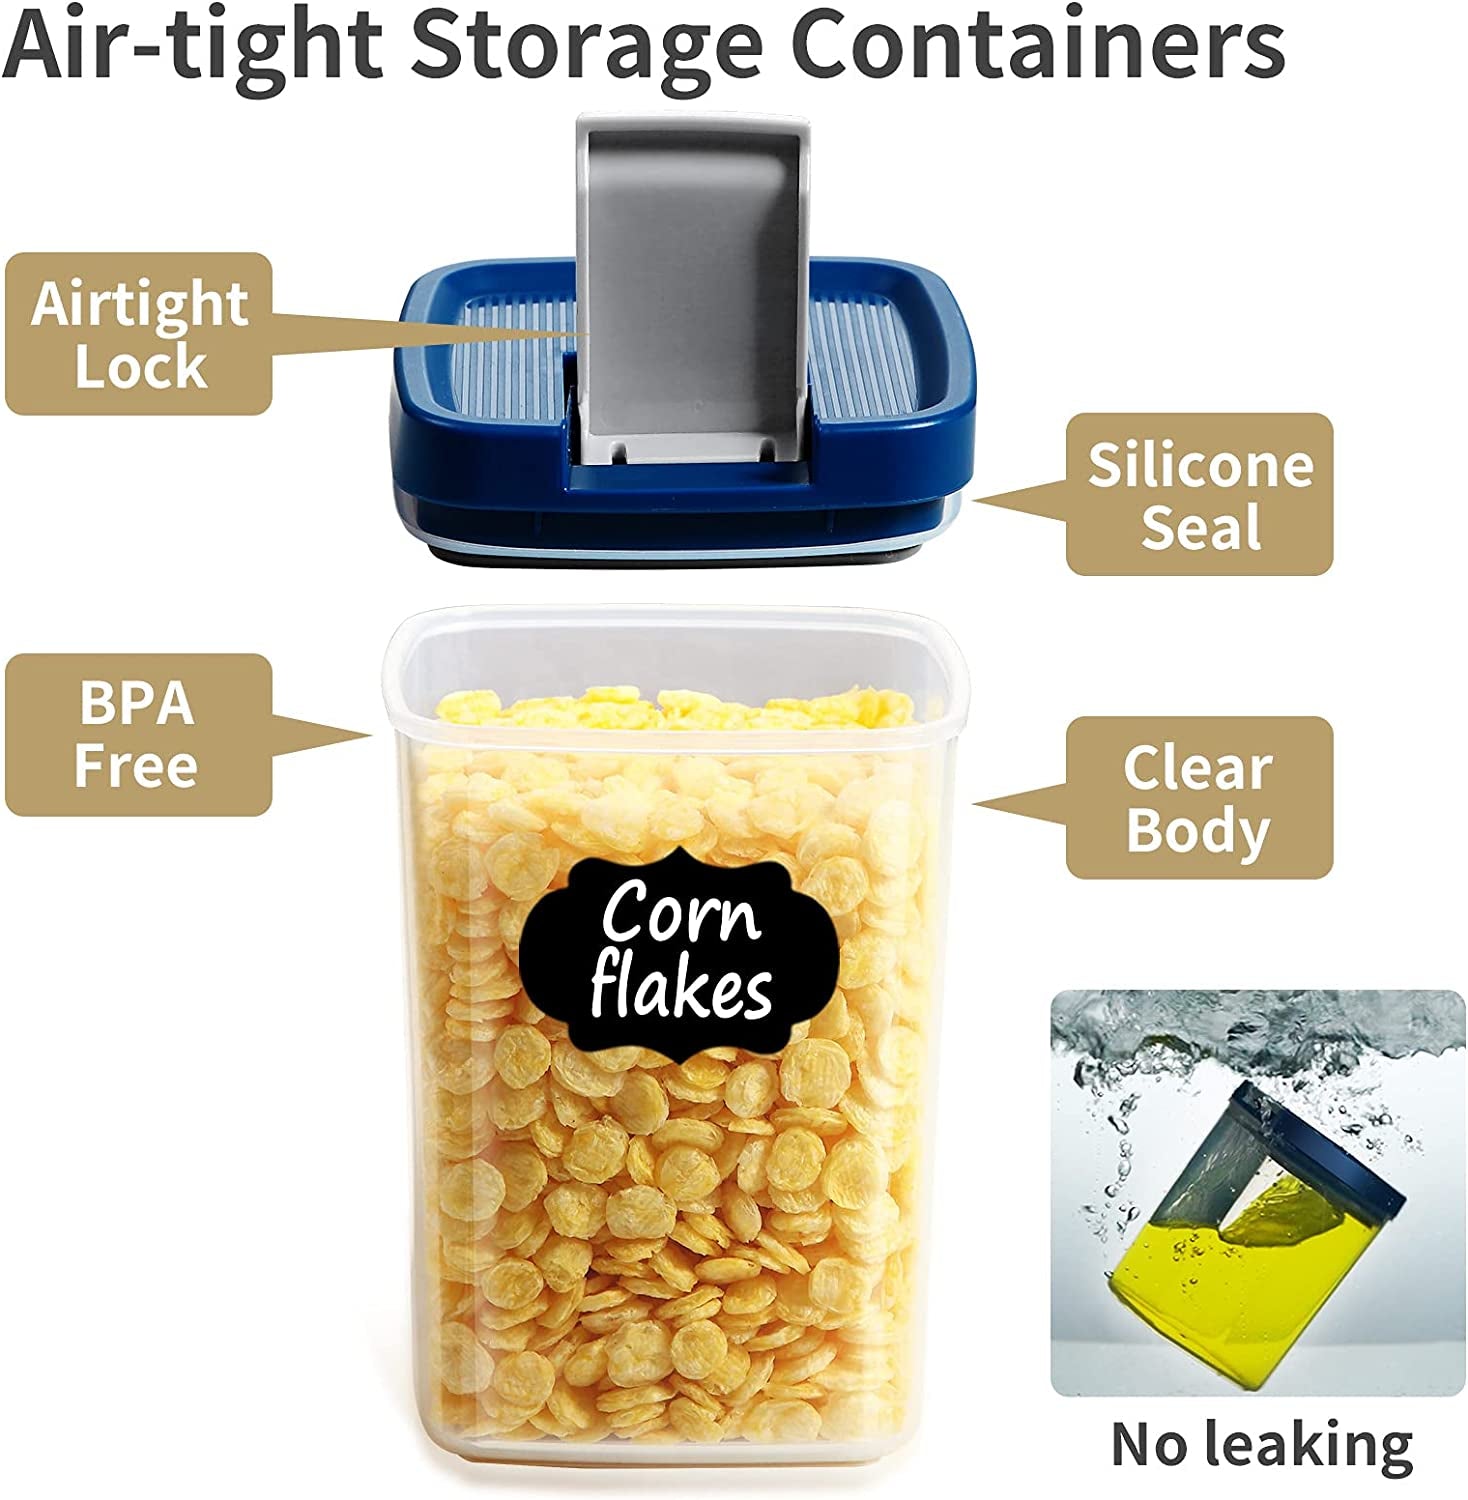 Professional Title: " 12-Pack Airtight Food Storage Containers with Easy Lock Lid - BPA Free Plastic Containers for Kitchen & Pantry Organization - Ideal for Cereal, Pasta, Flour"